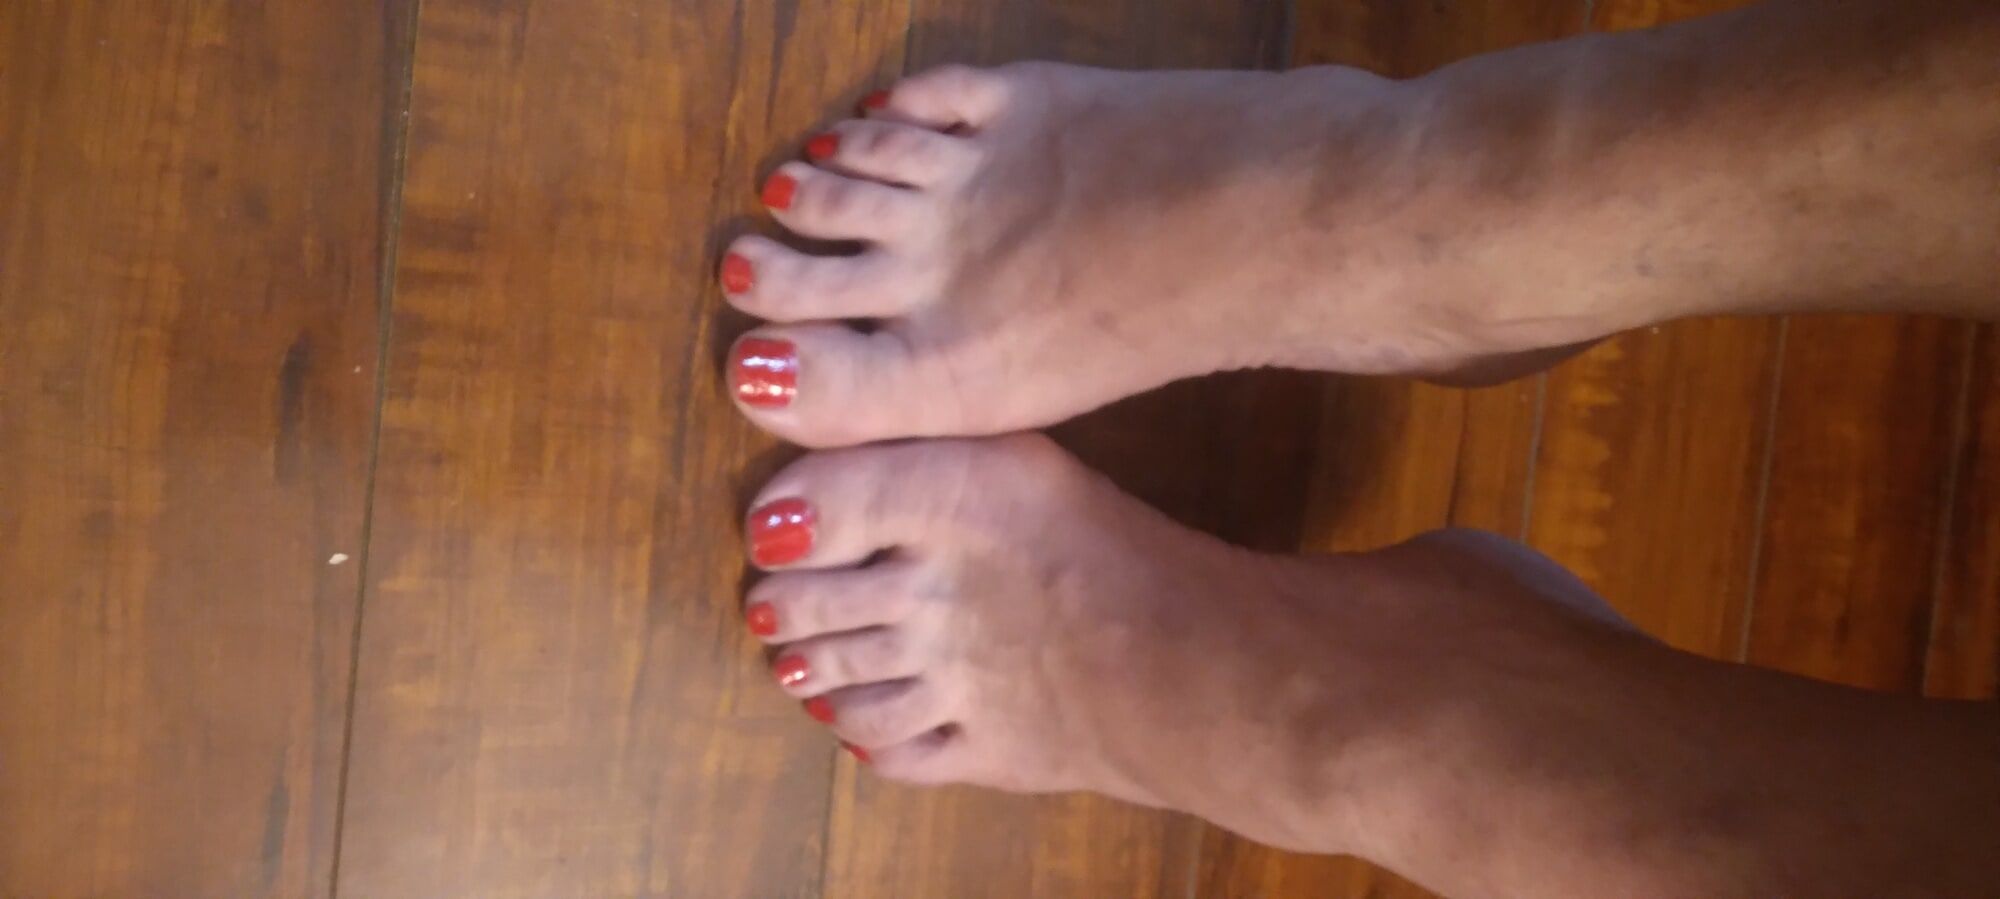 Pics of my feet and they're lookin so sweet.